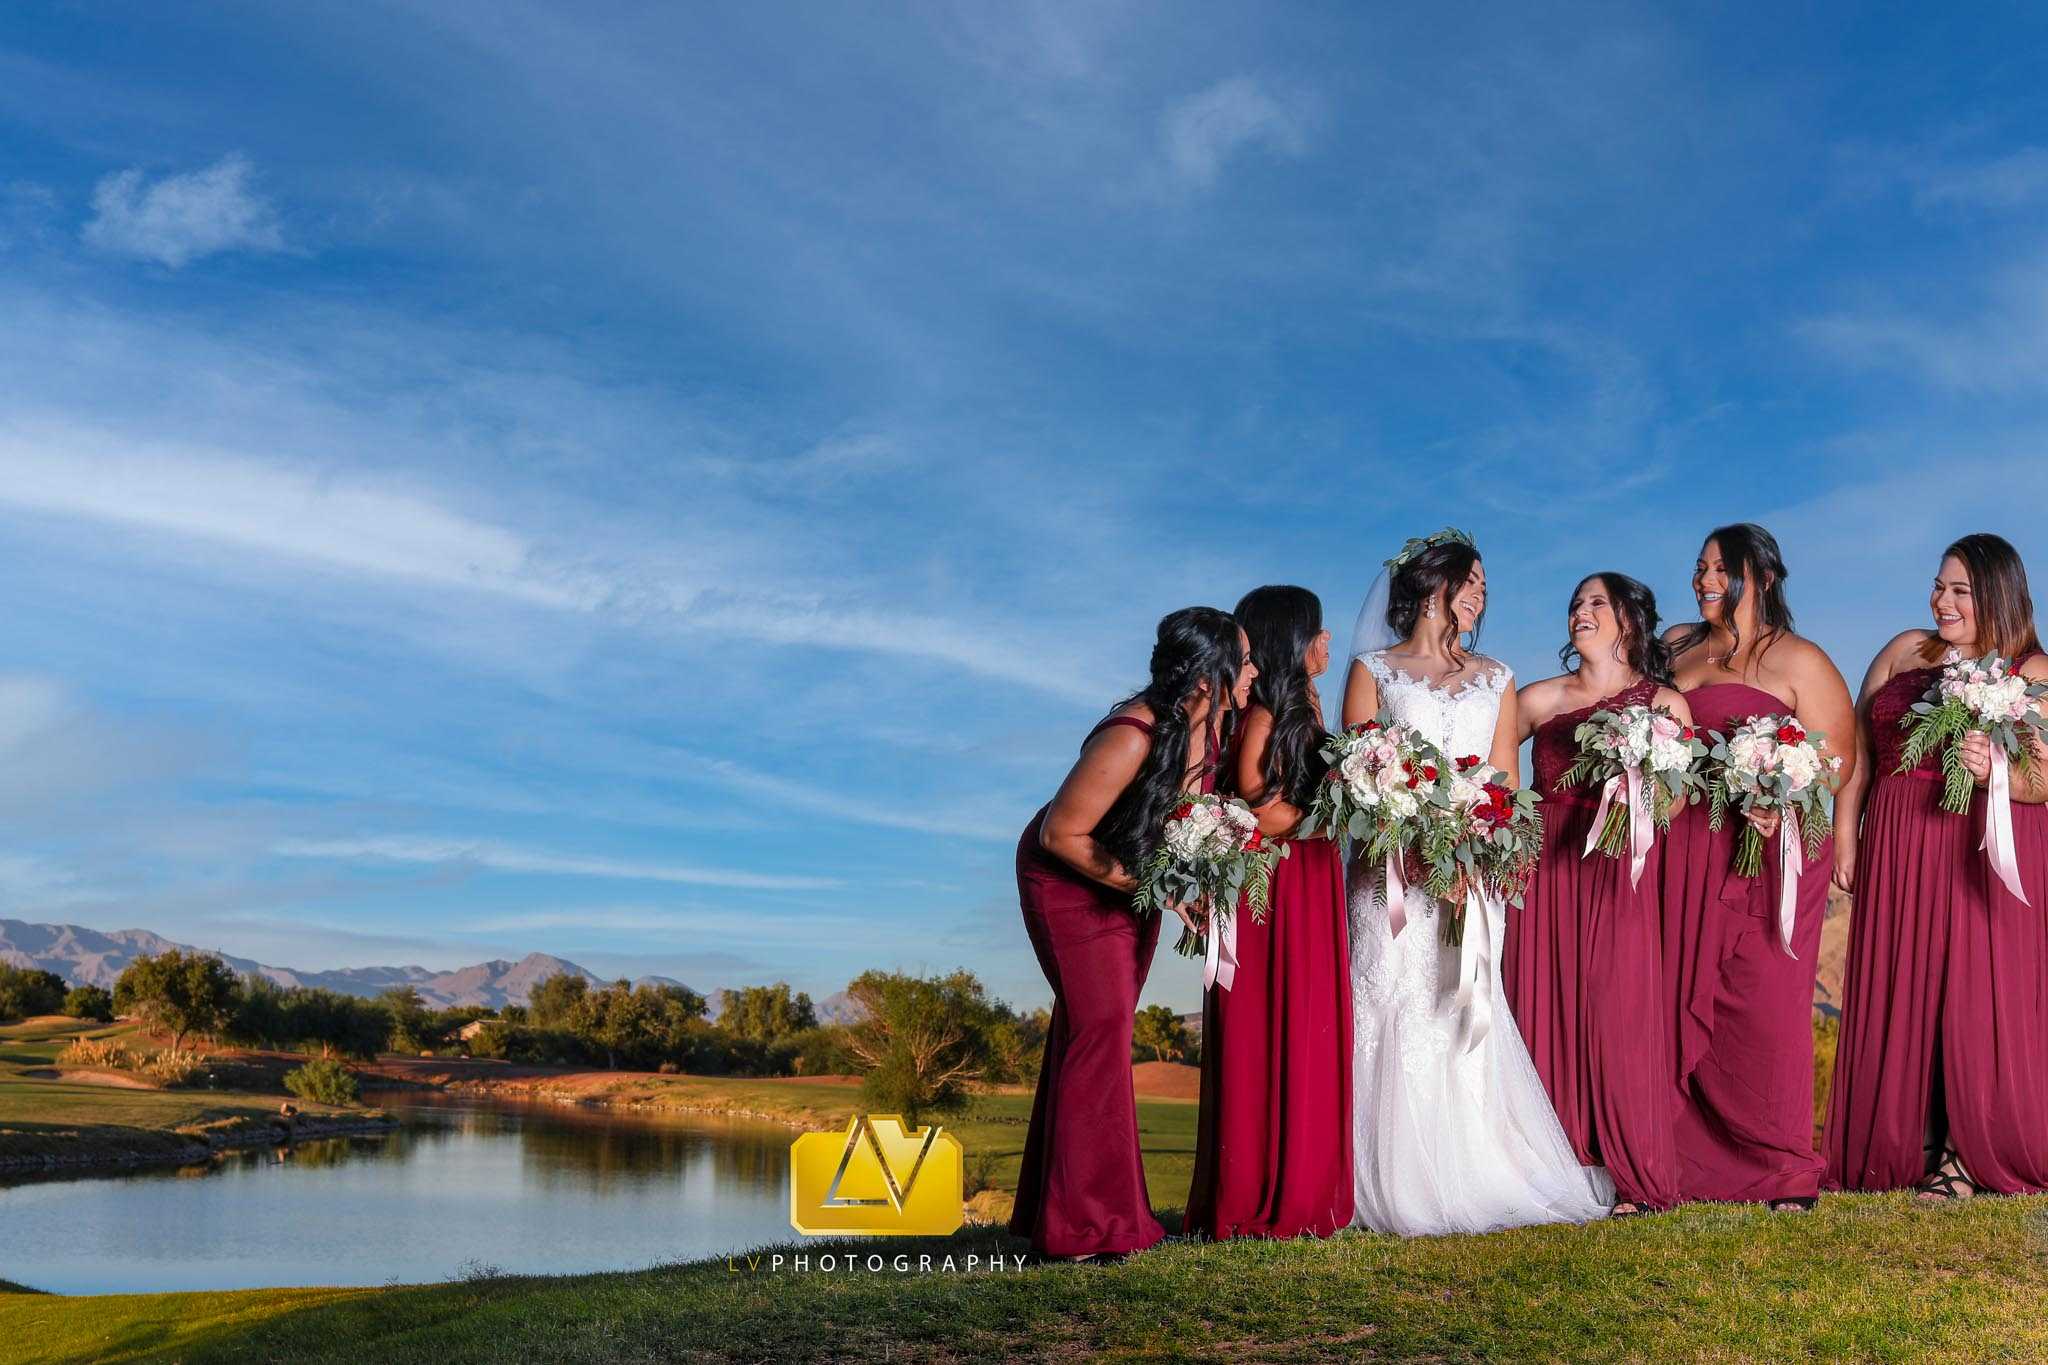 Wedding Photographer At The Country Club Golf Course Las Vegas NV